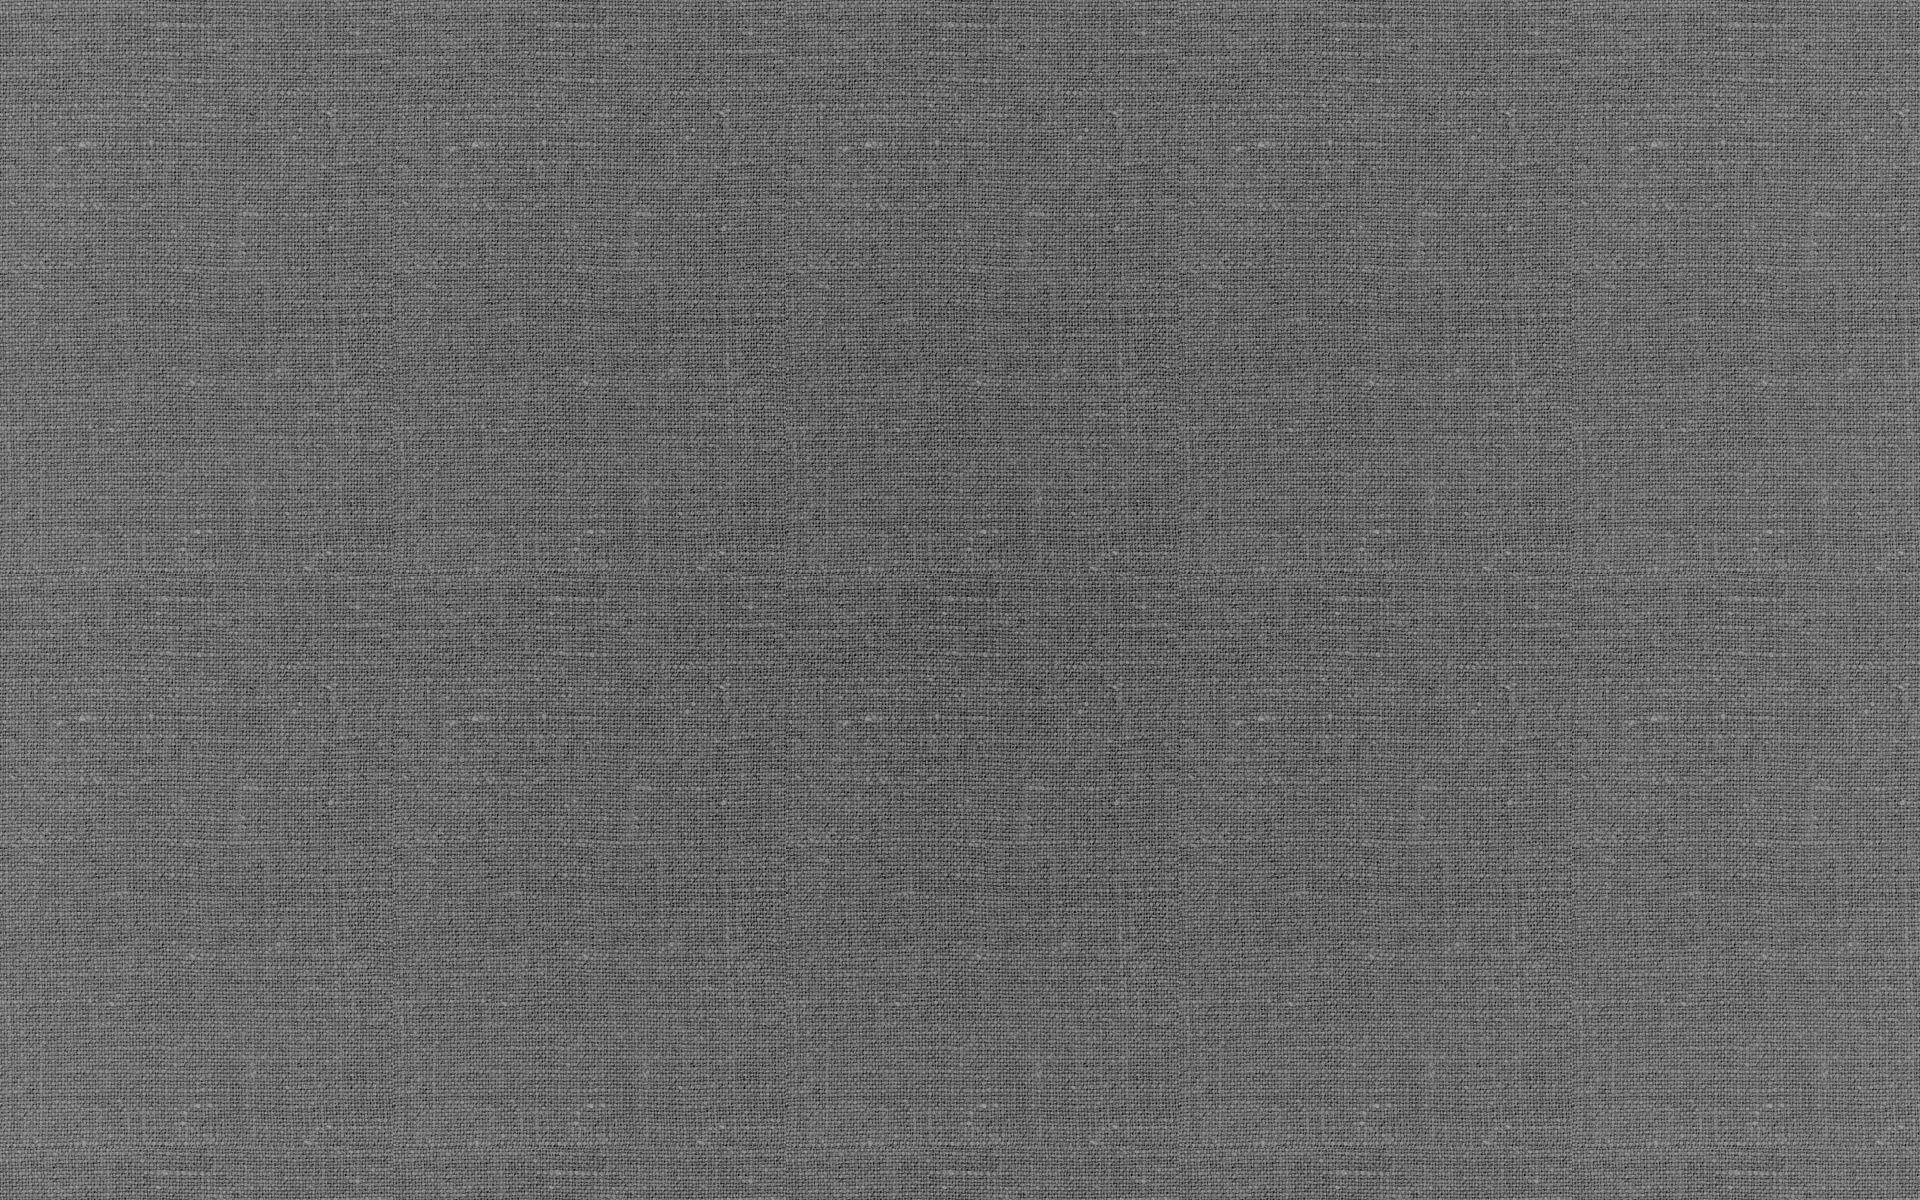 139286 download wallpaper textures, grid, texture, lines, surface, grey screensavers and pictures for free